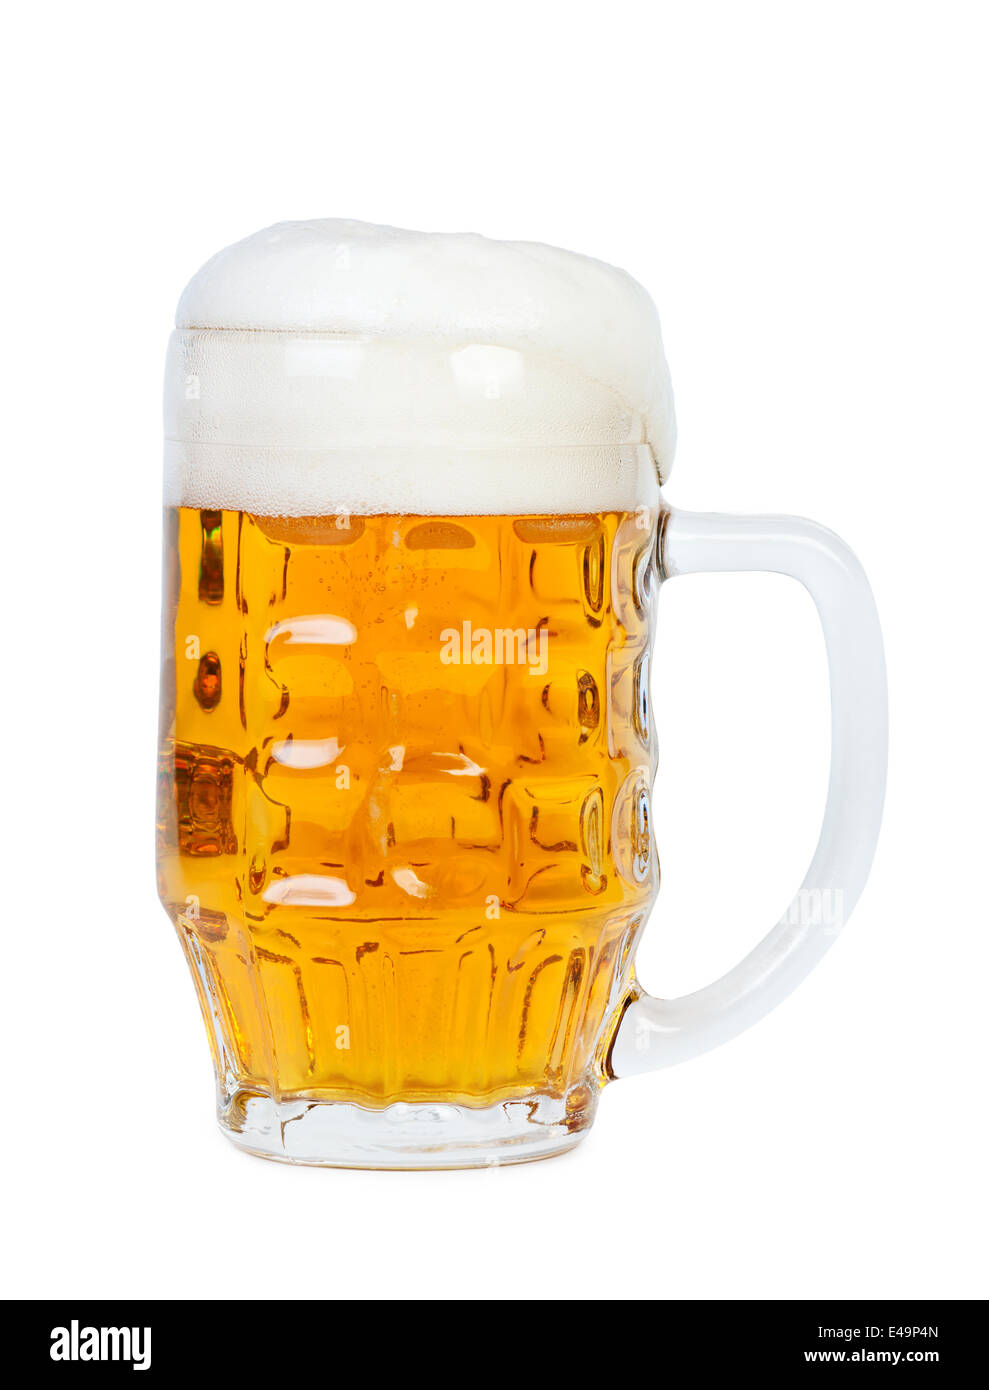 Beer glass with handle. Stock Photo